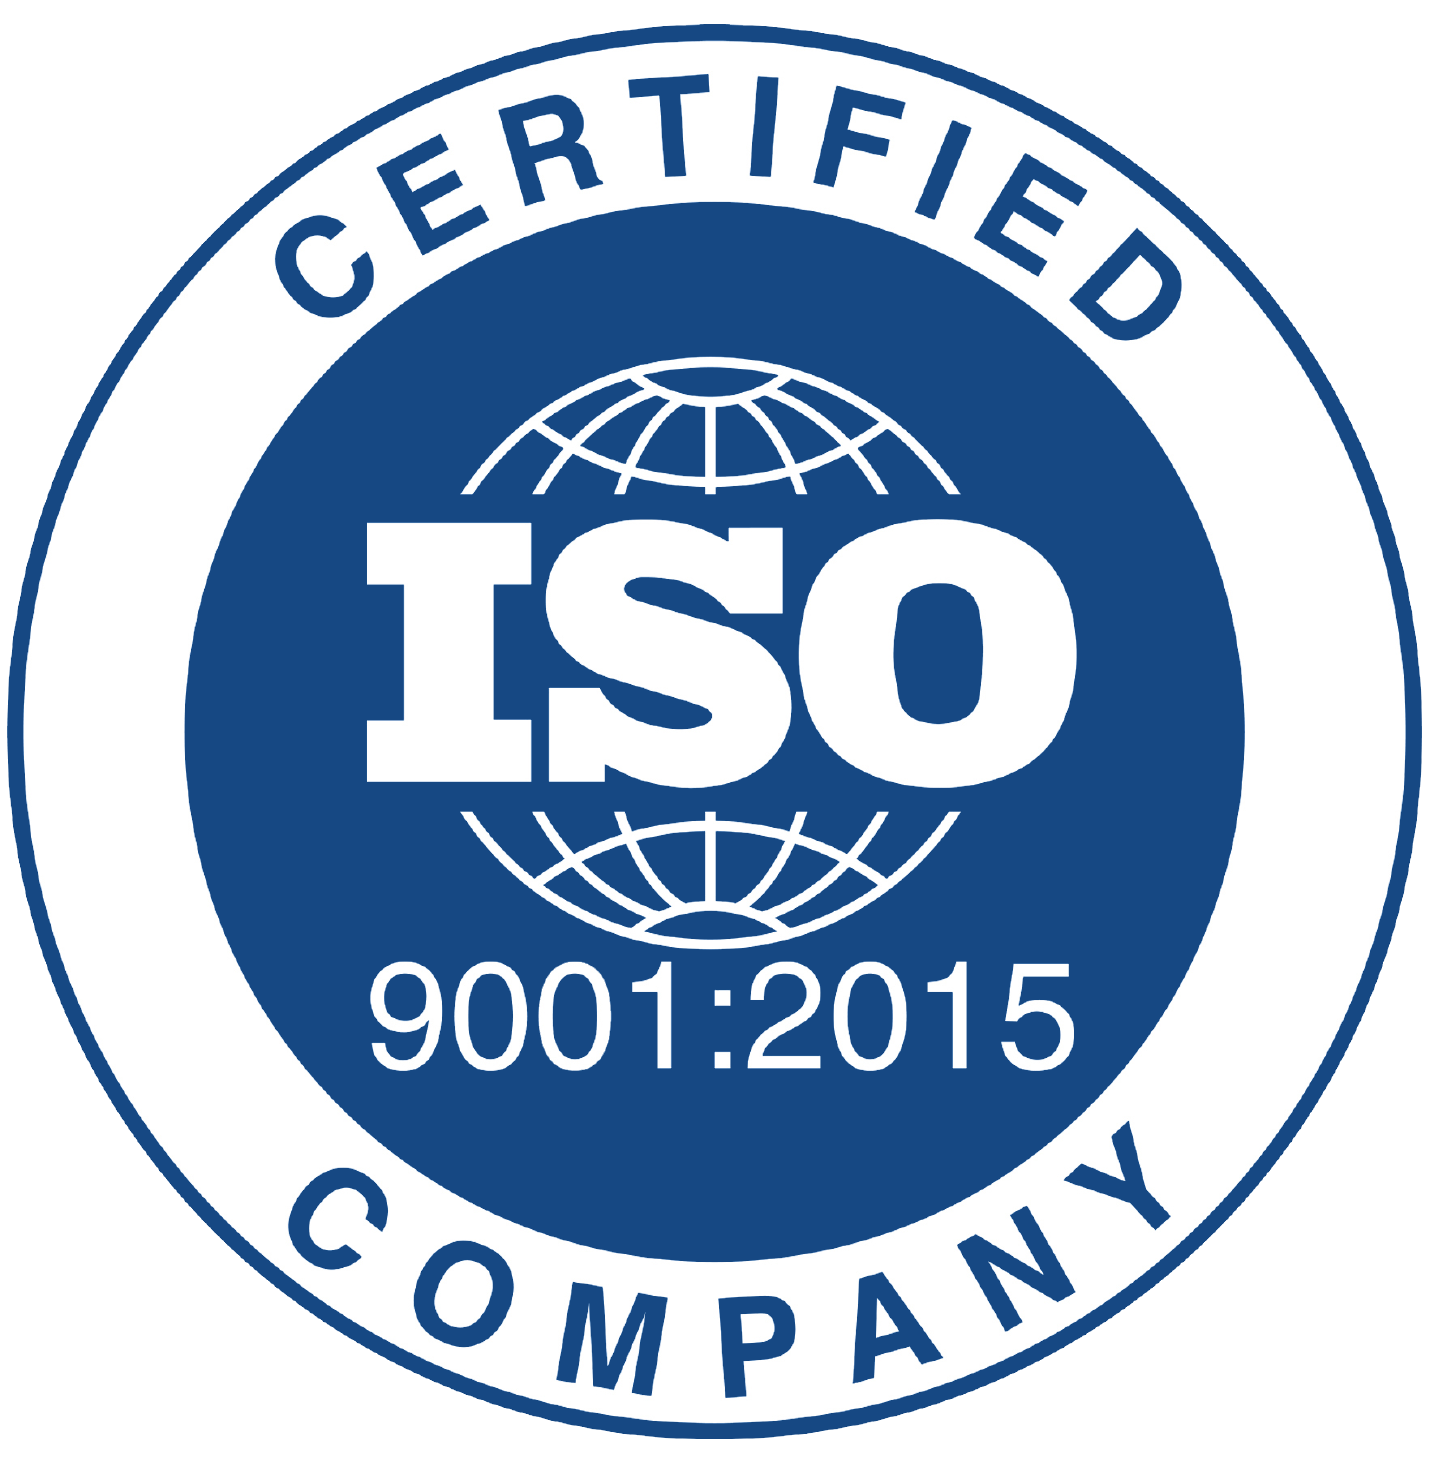 ISO-9001:2015